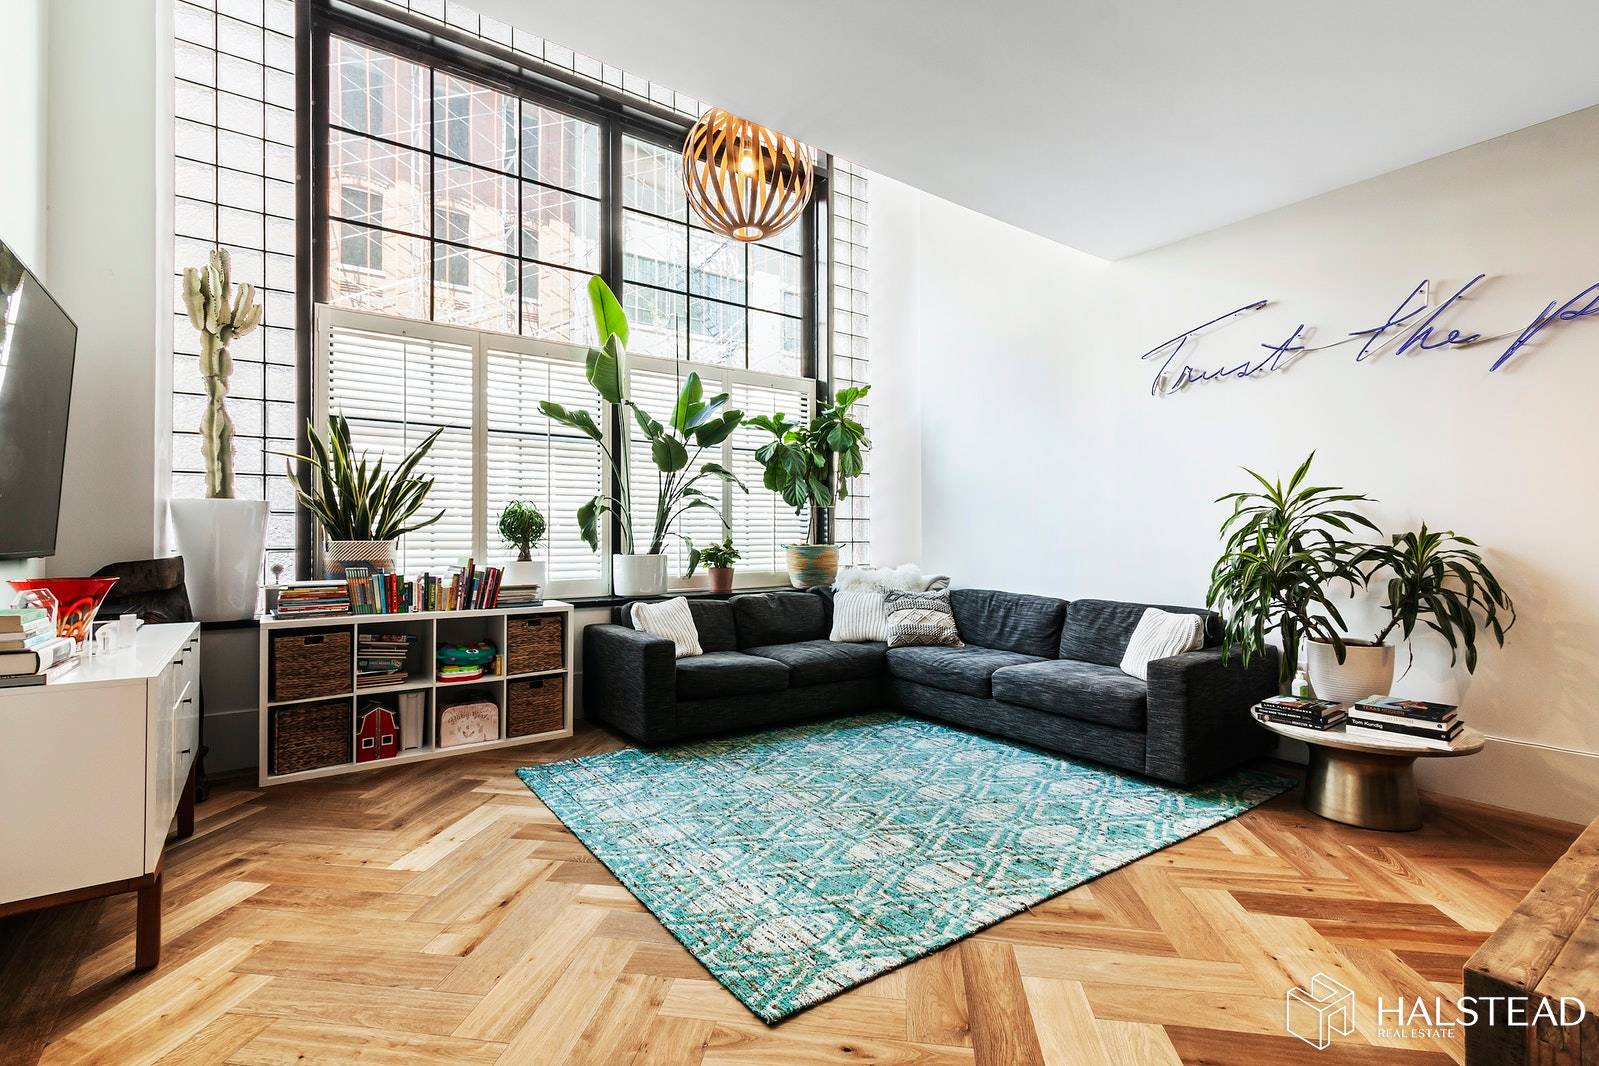 Designed with the highest quality finishes, 51 Jay Street sets a new standard for loft living in one of DUMBO's architecturally stunning building.